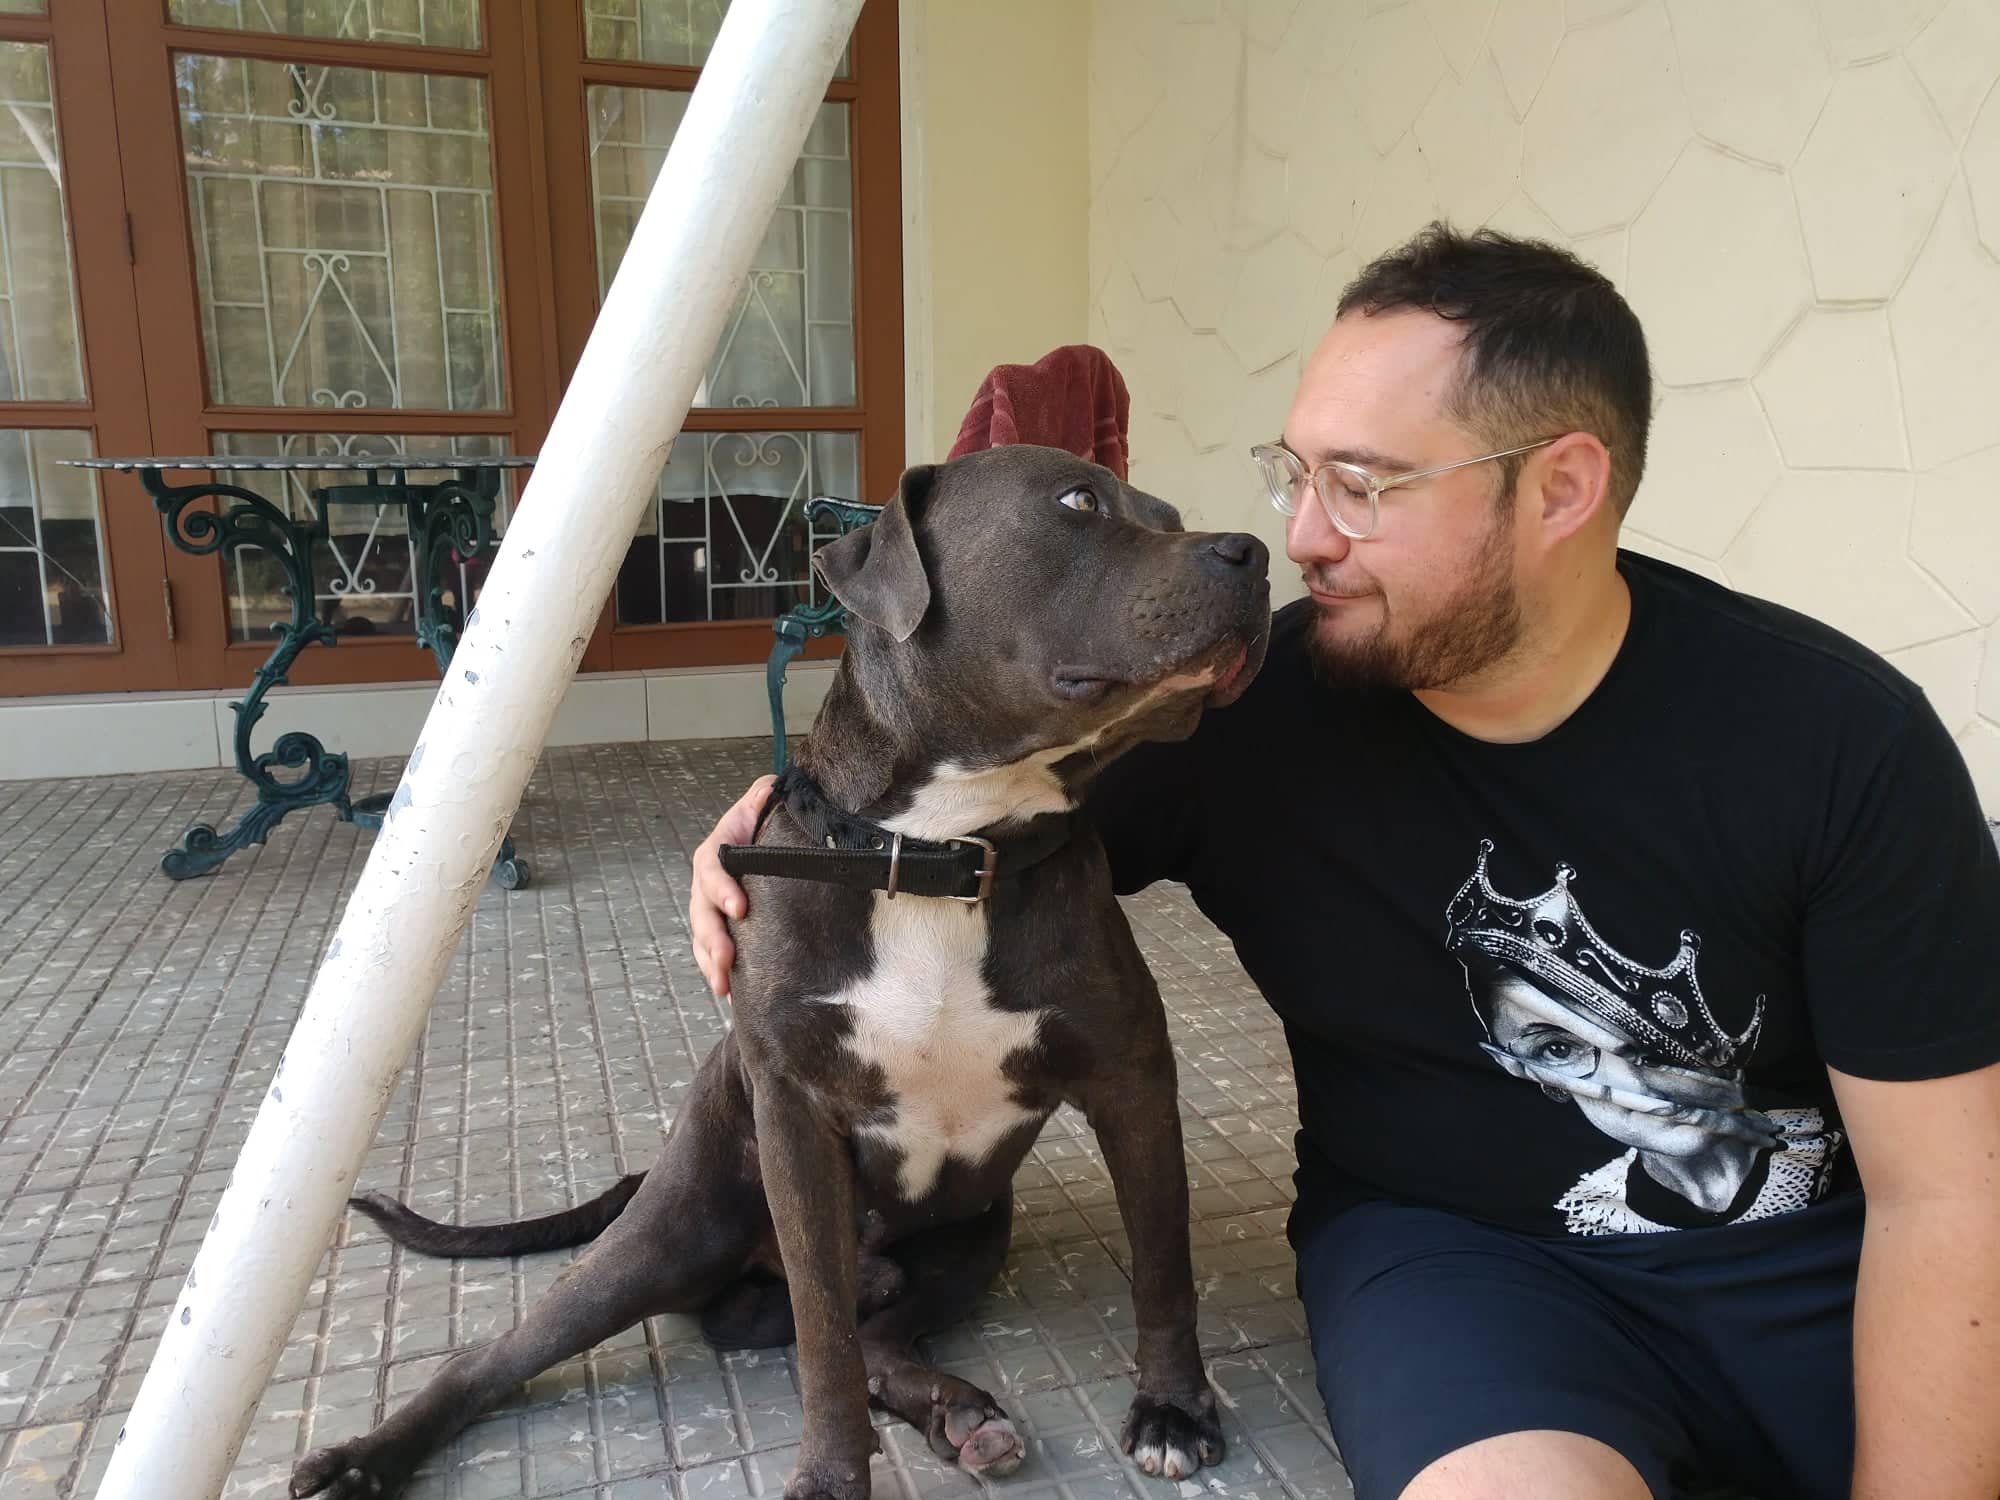 Kraken and I on the porch